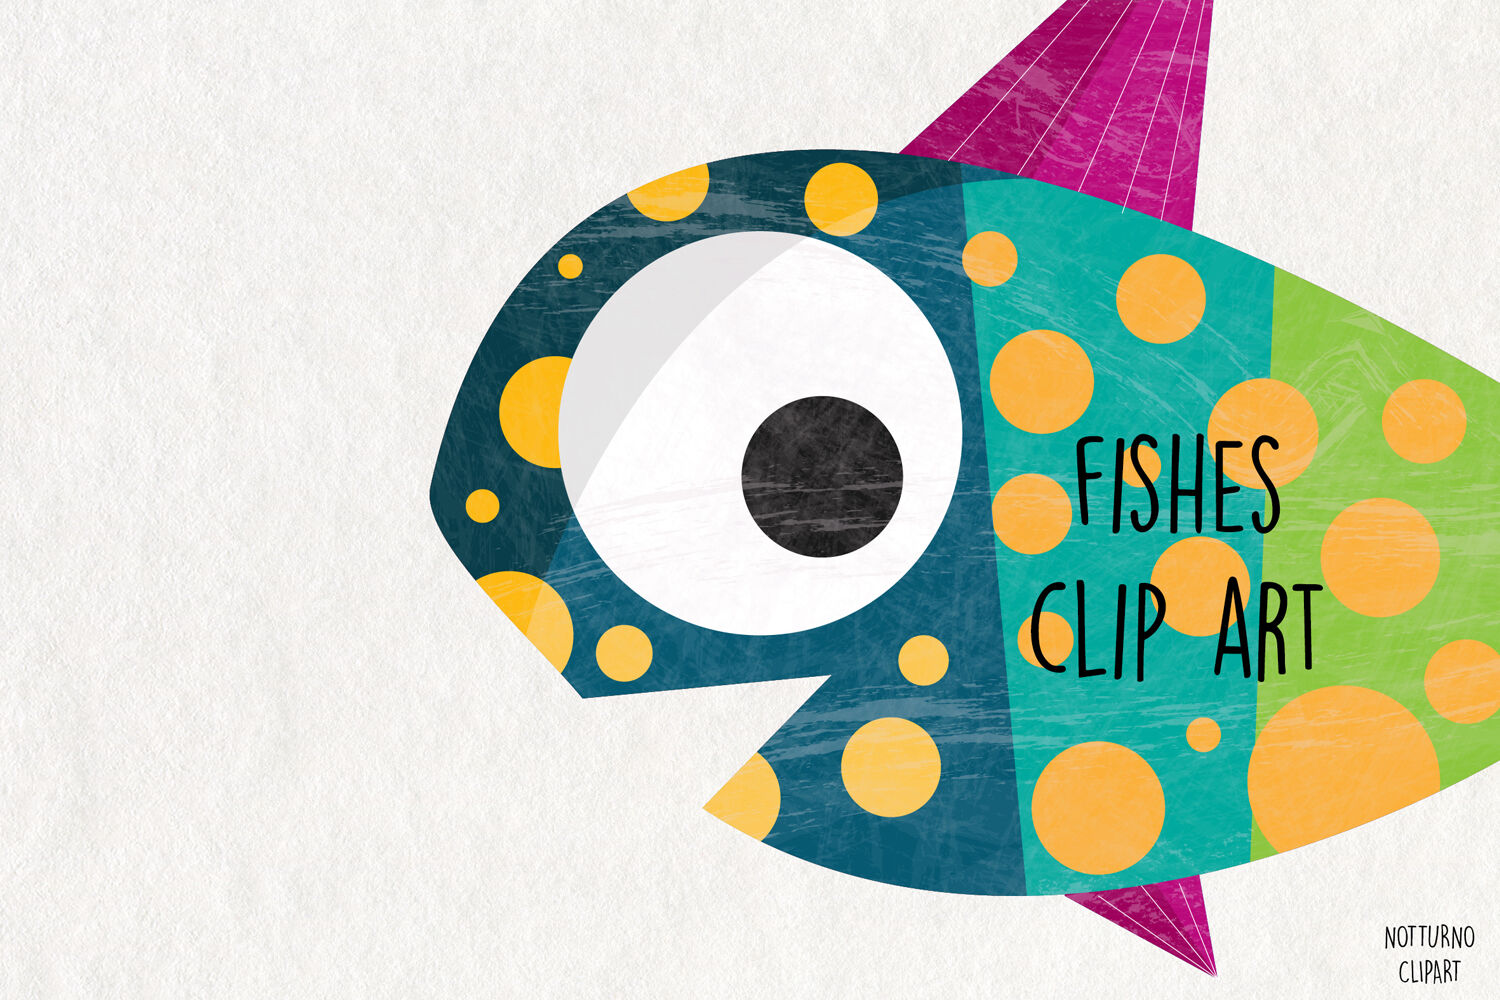 Colorful Fish clipart, instant download. Set of 6 cute fishes clipart. By  NotturnoClipArt